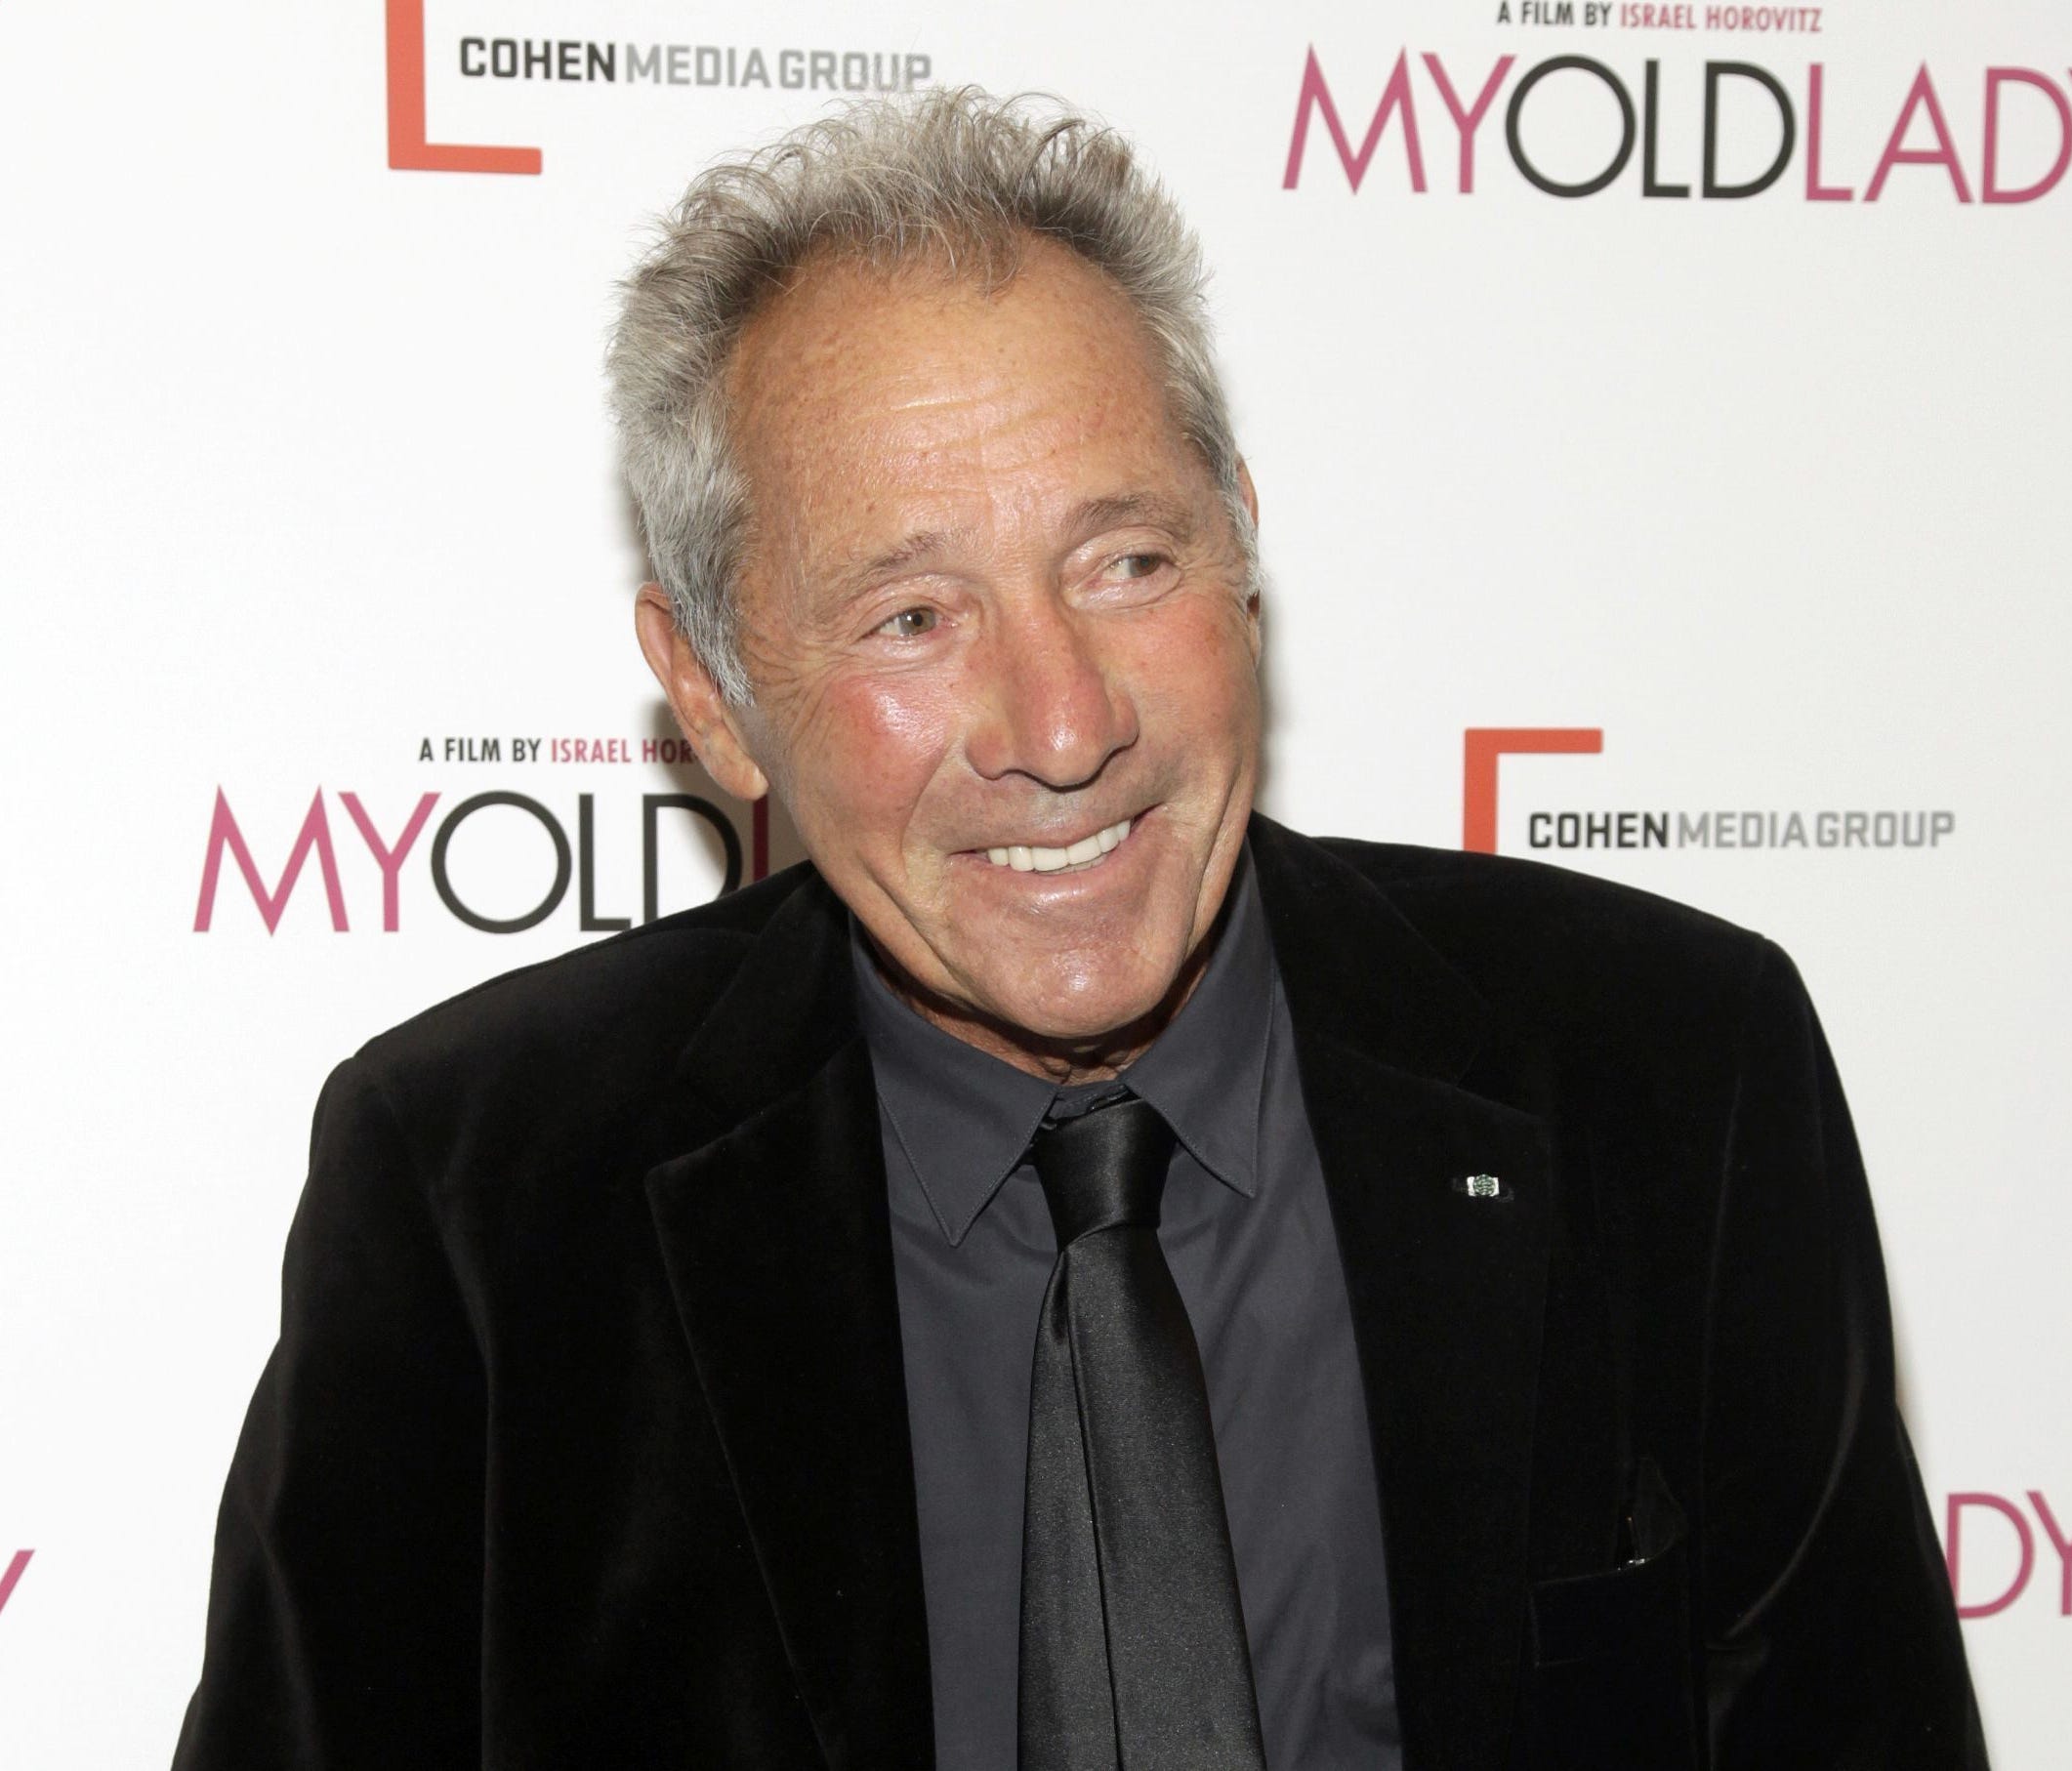 Nine women have accused playwright Israel Horovitz of sexual misconduct and his son, Beastie Boys' Adam Horovitz, says he believes the accusers.